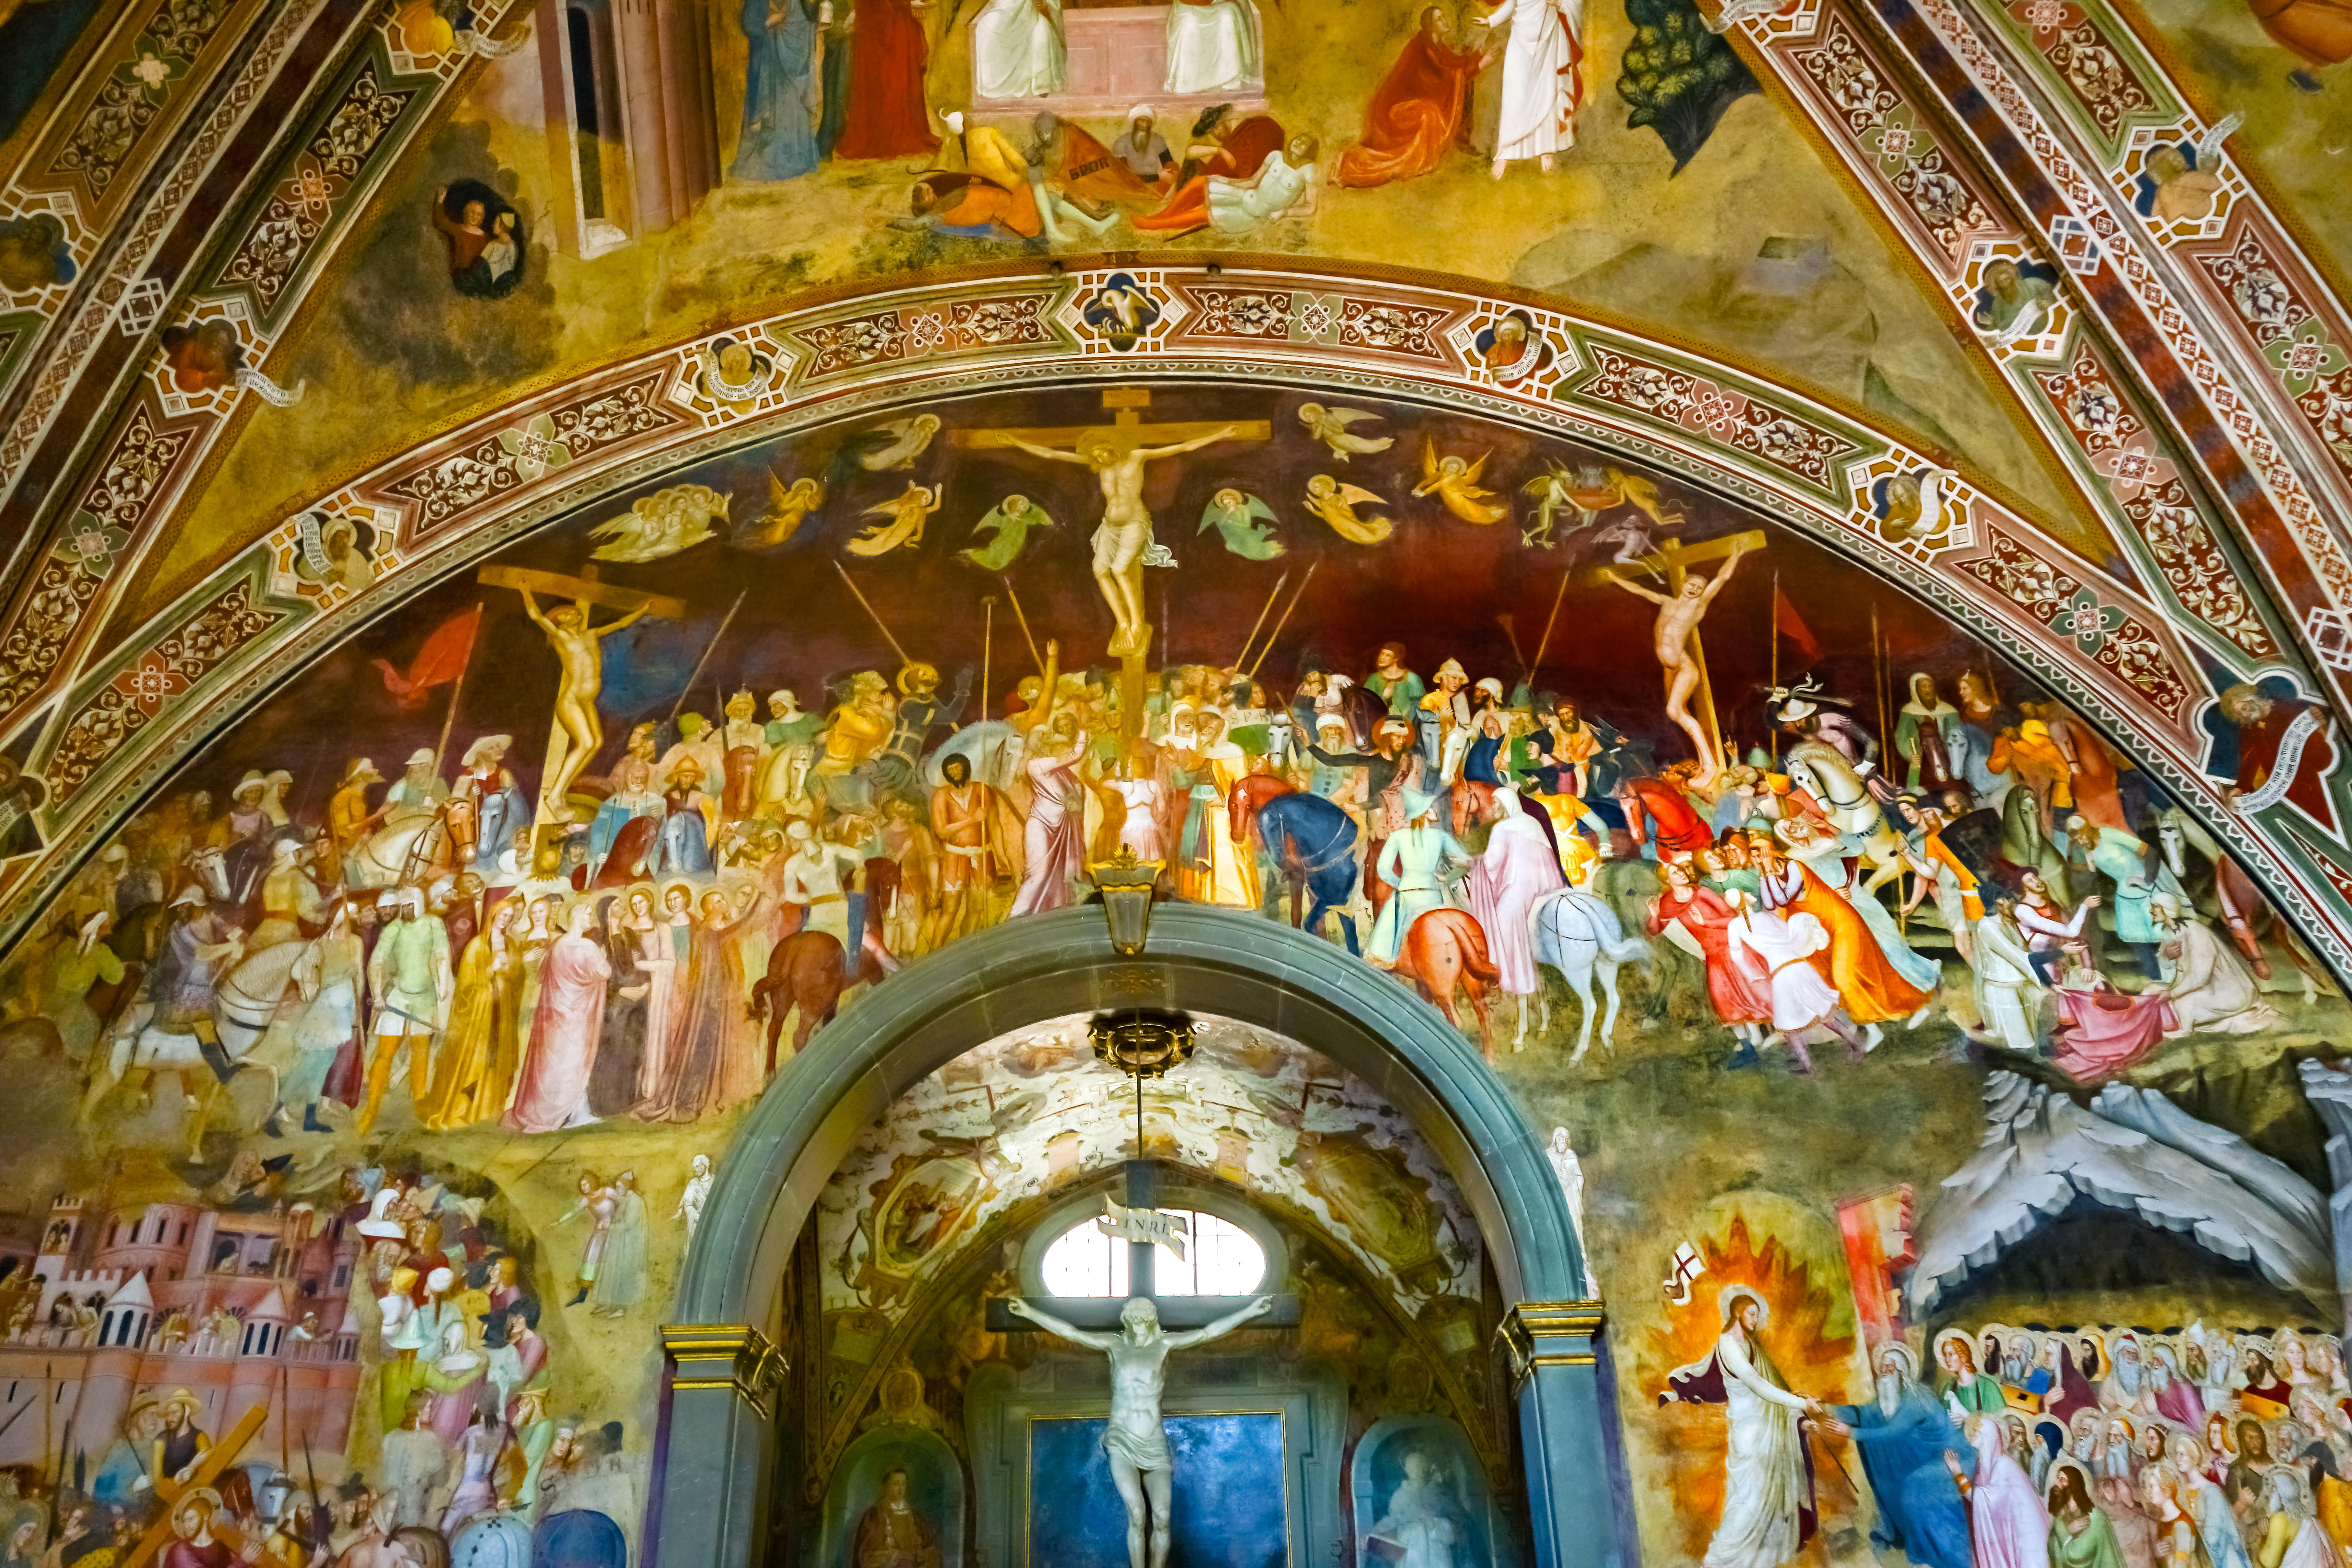 Feast Your Eyes With Frescoes In The Spanish Chapel